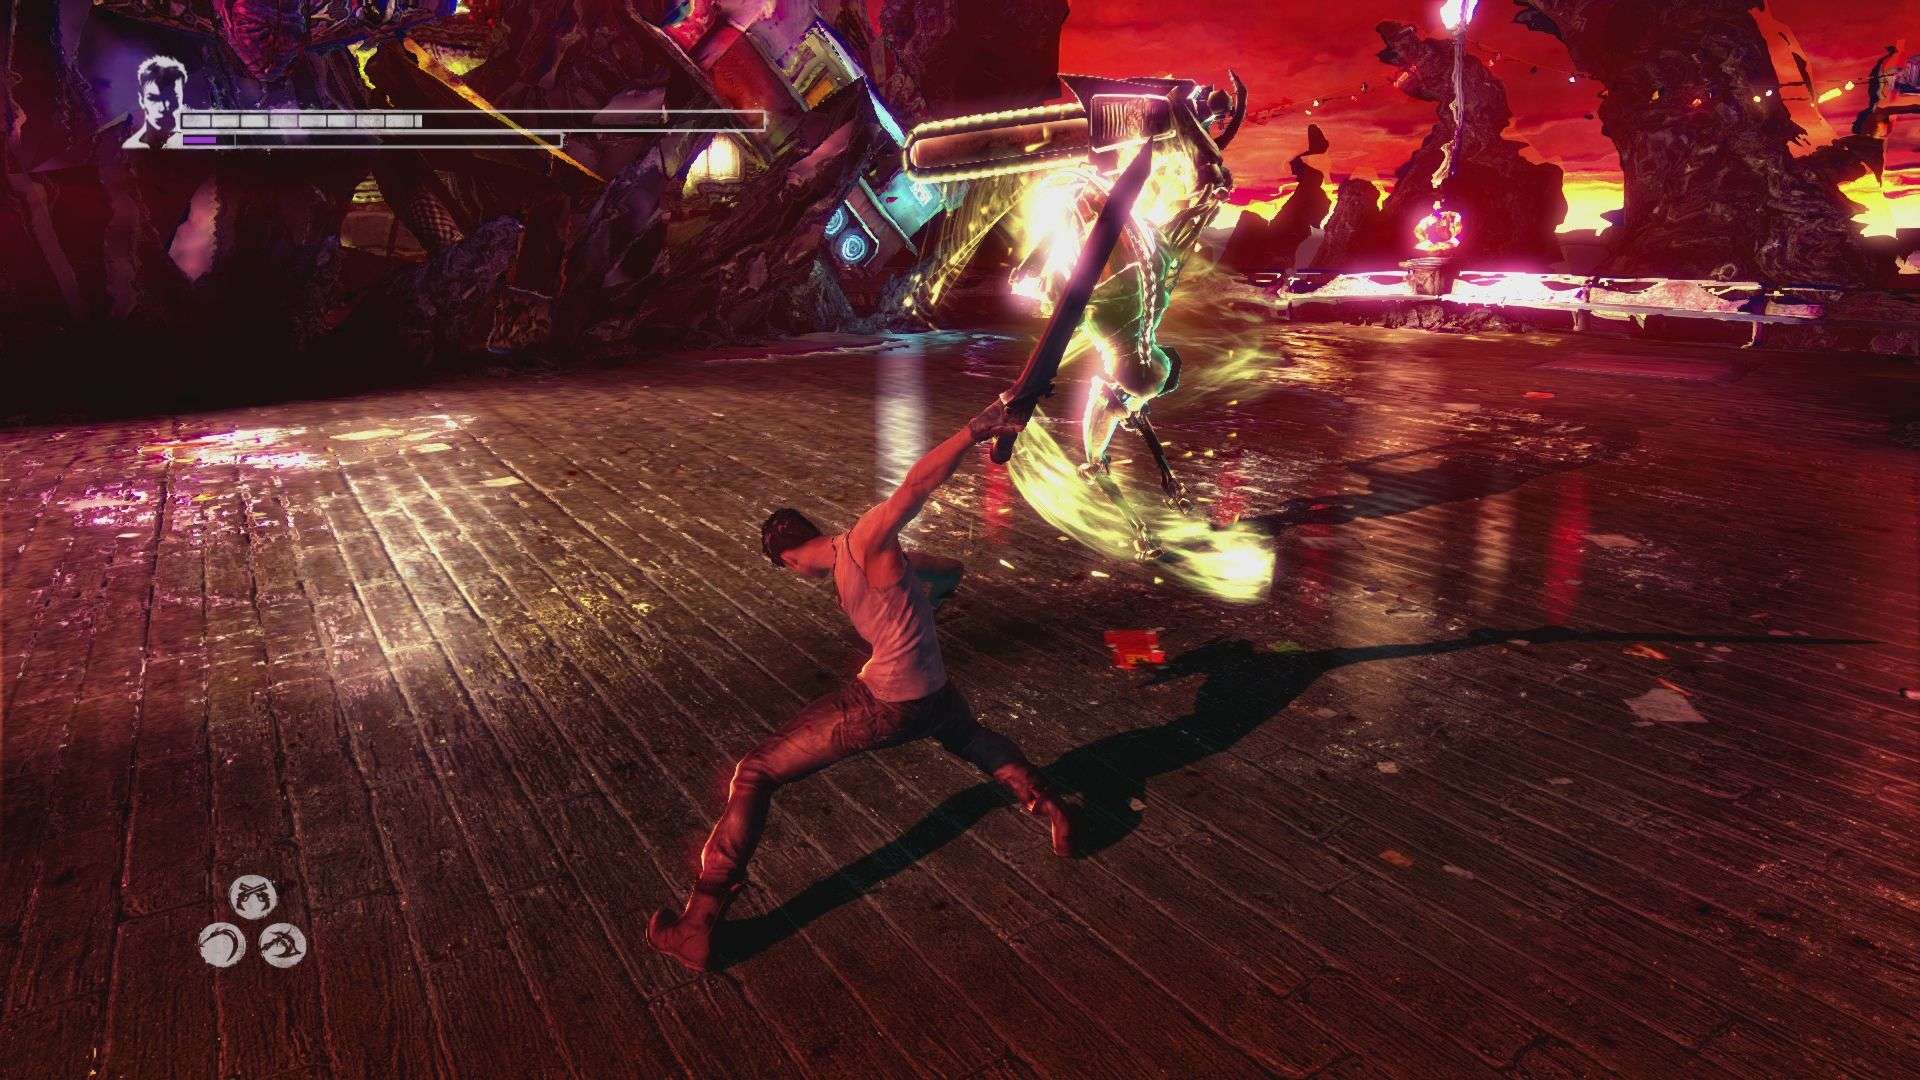 Another look at DmC Devil May Cry: Definitive Edition